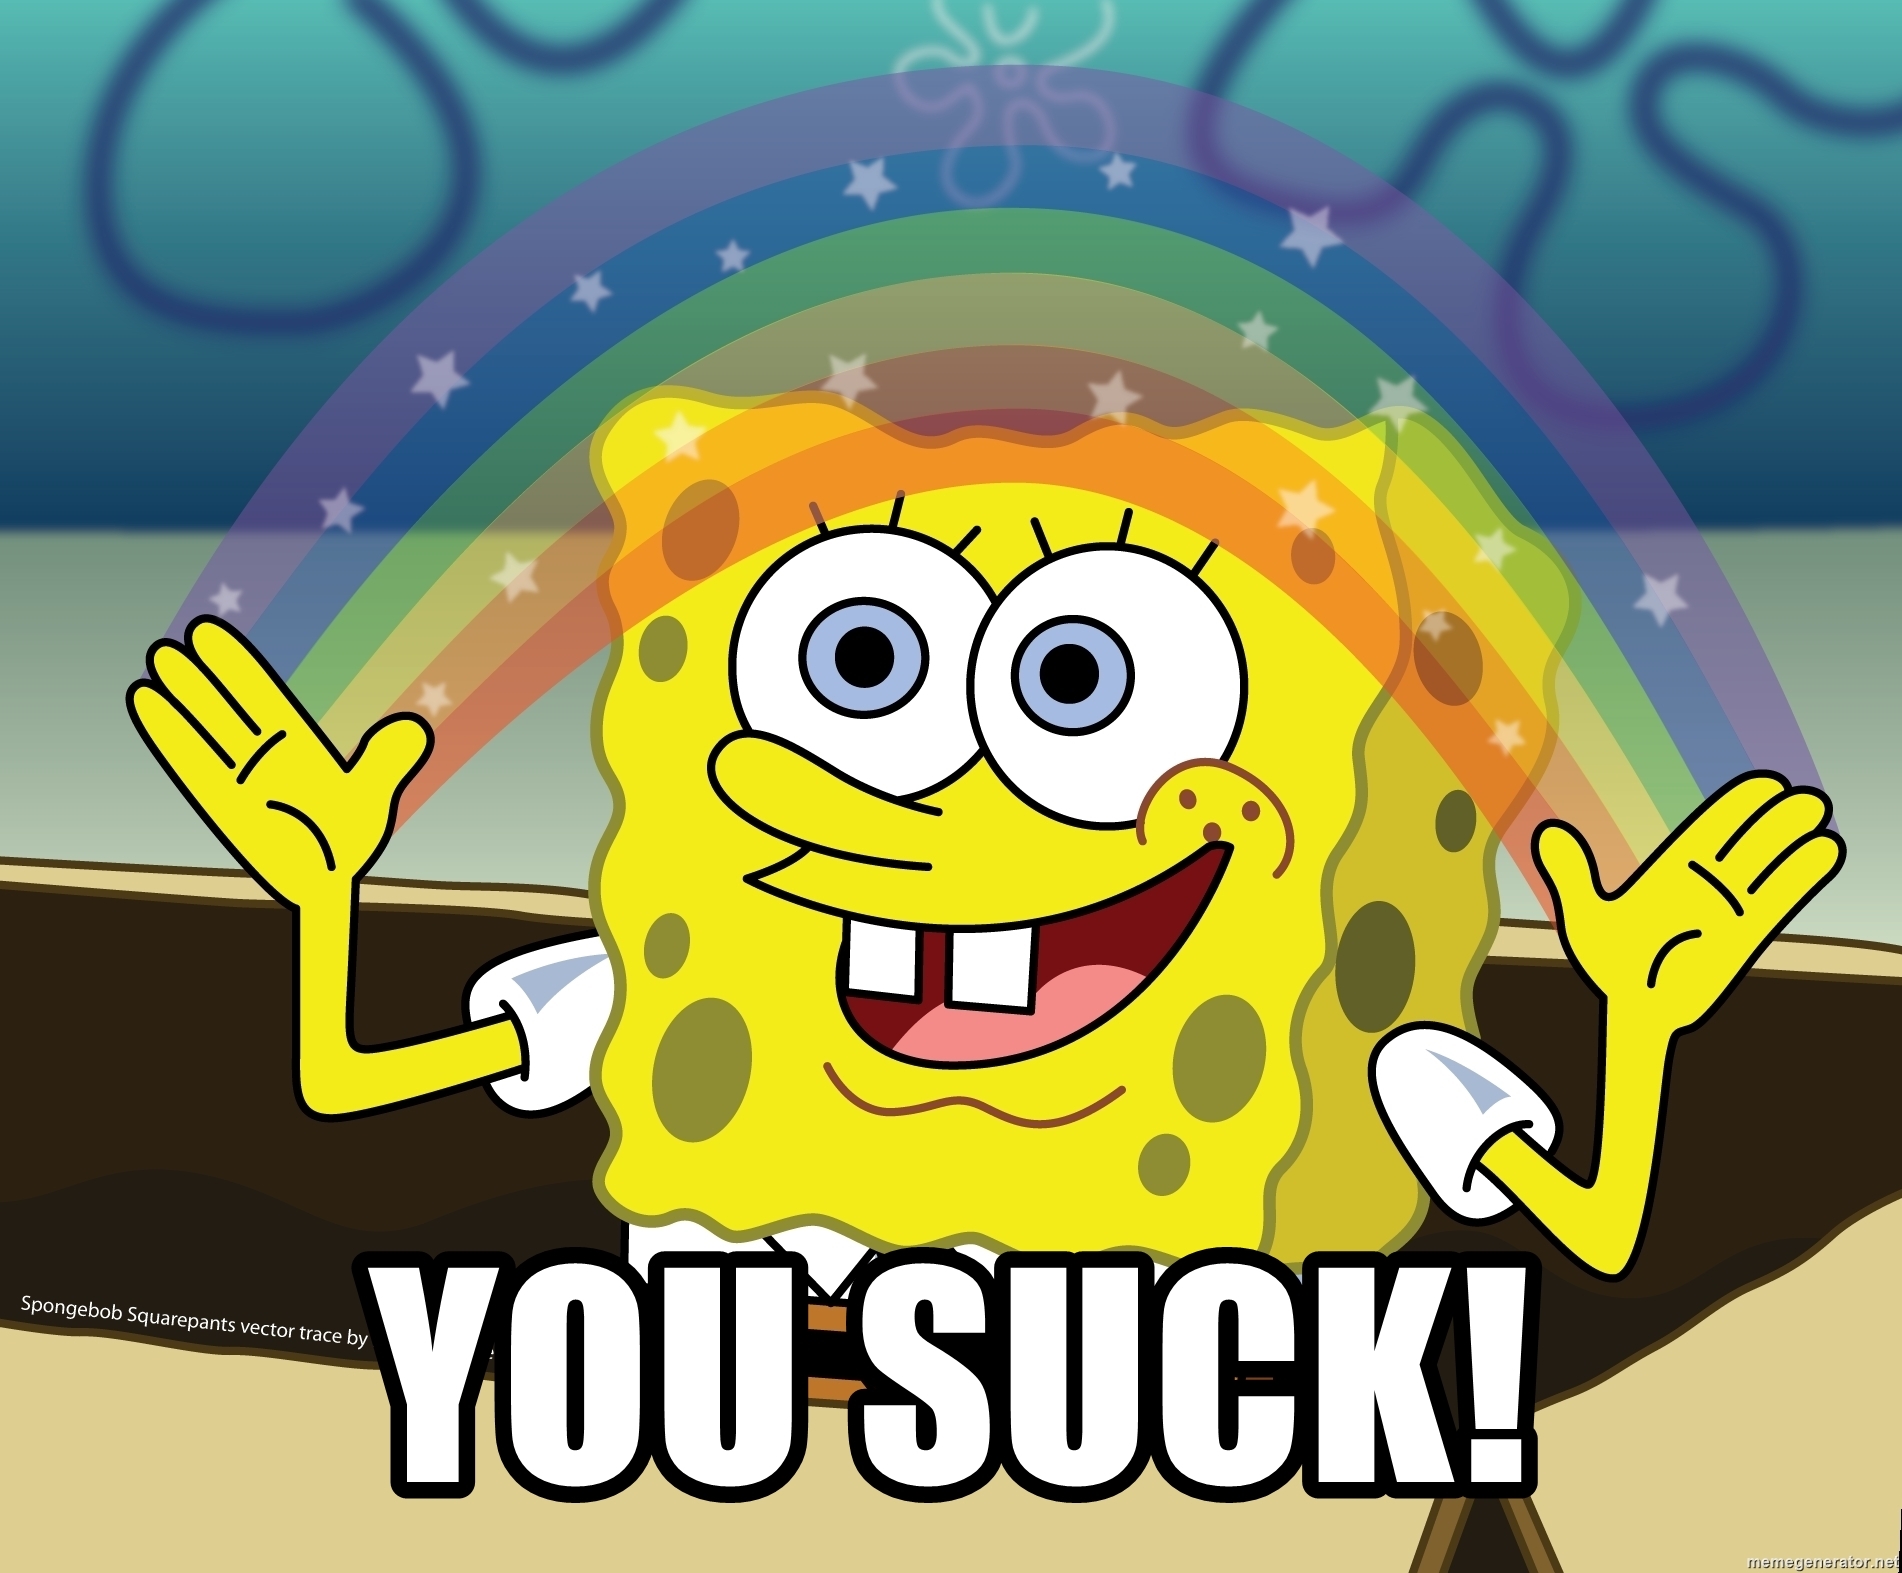 Spongebob Squarepants holding a rainbow, with the words "You suck"